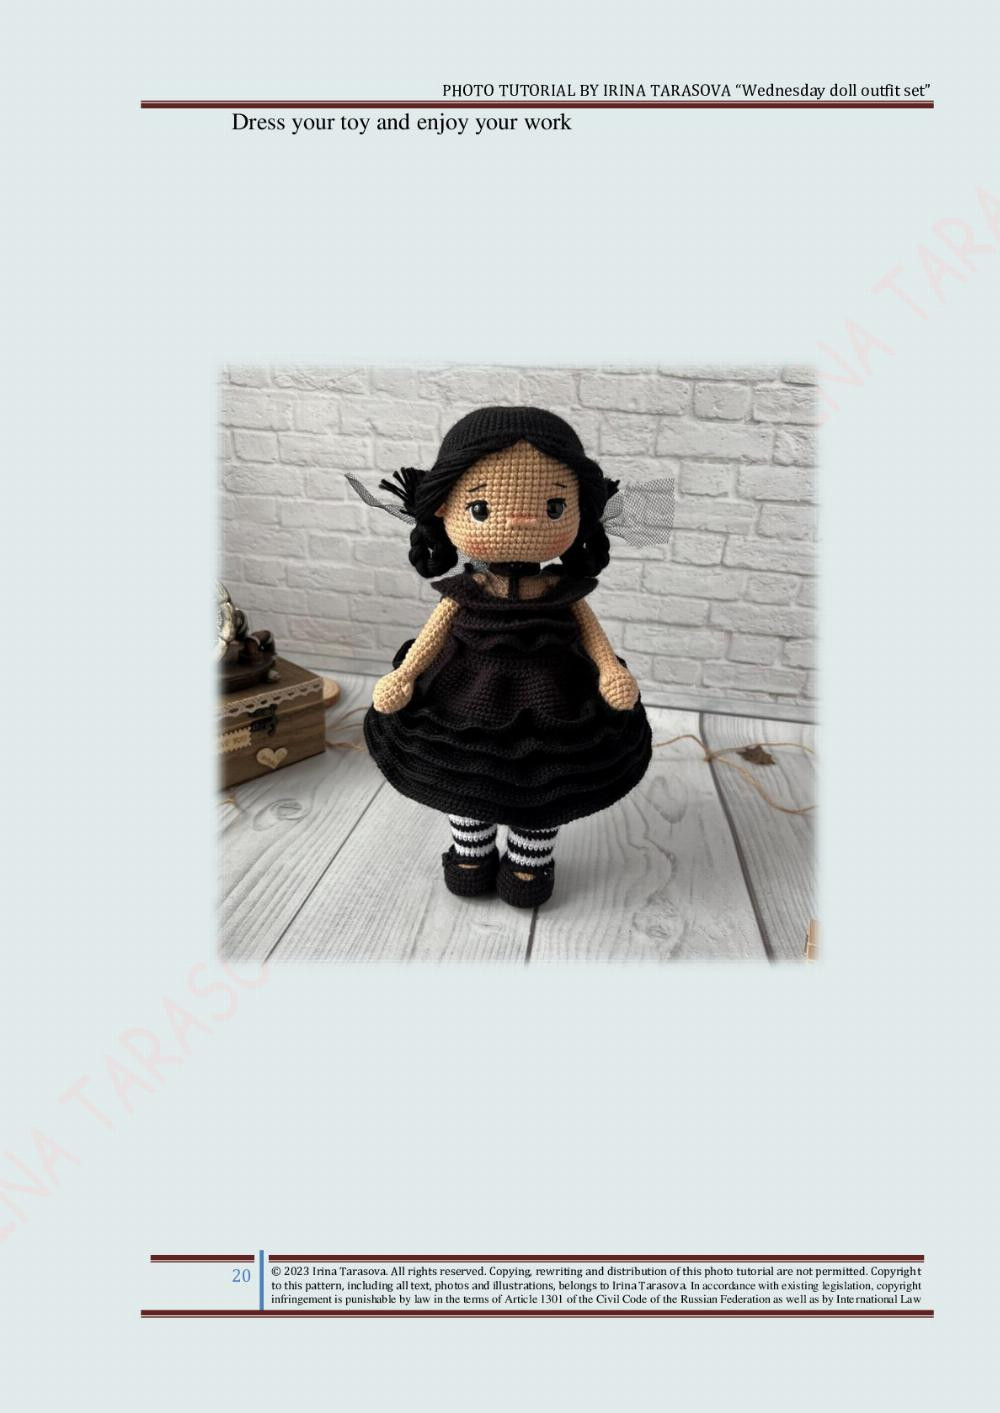 Wednesday doll outfit set